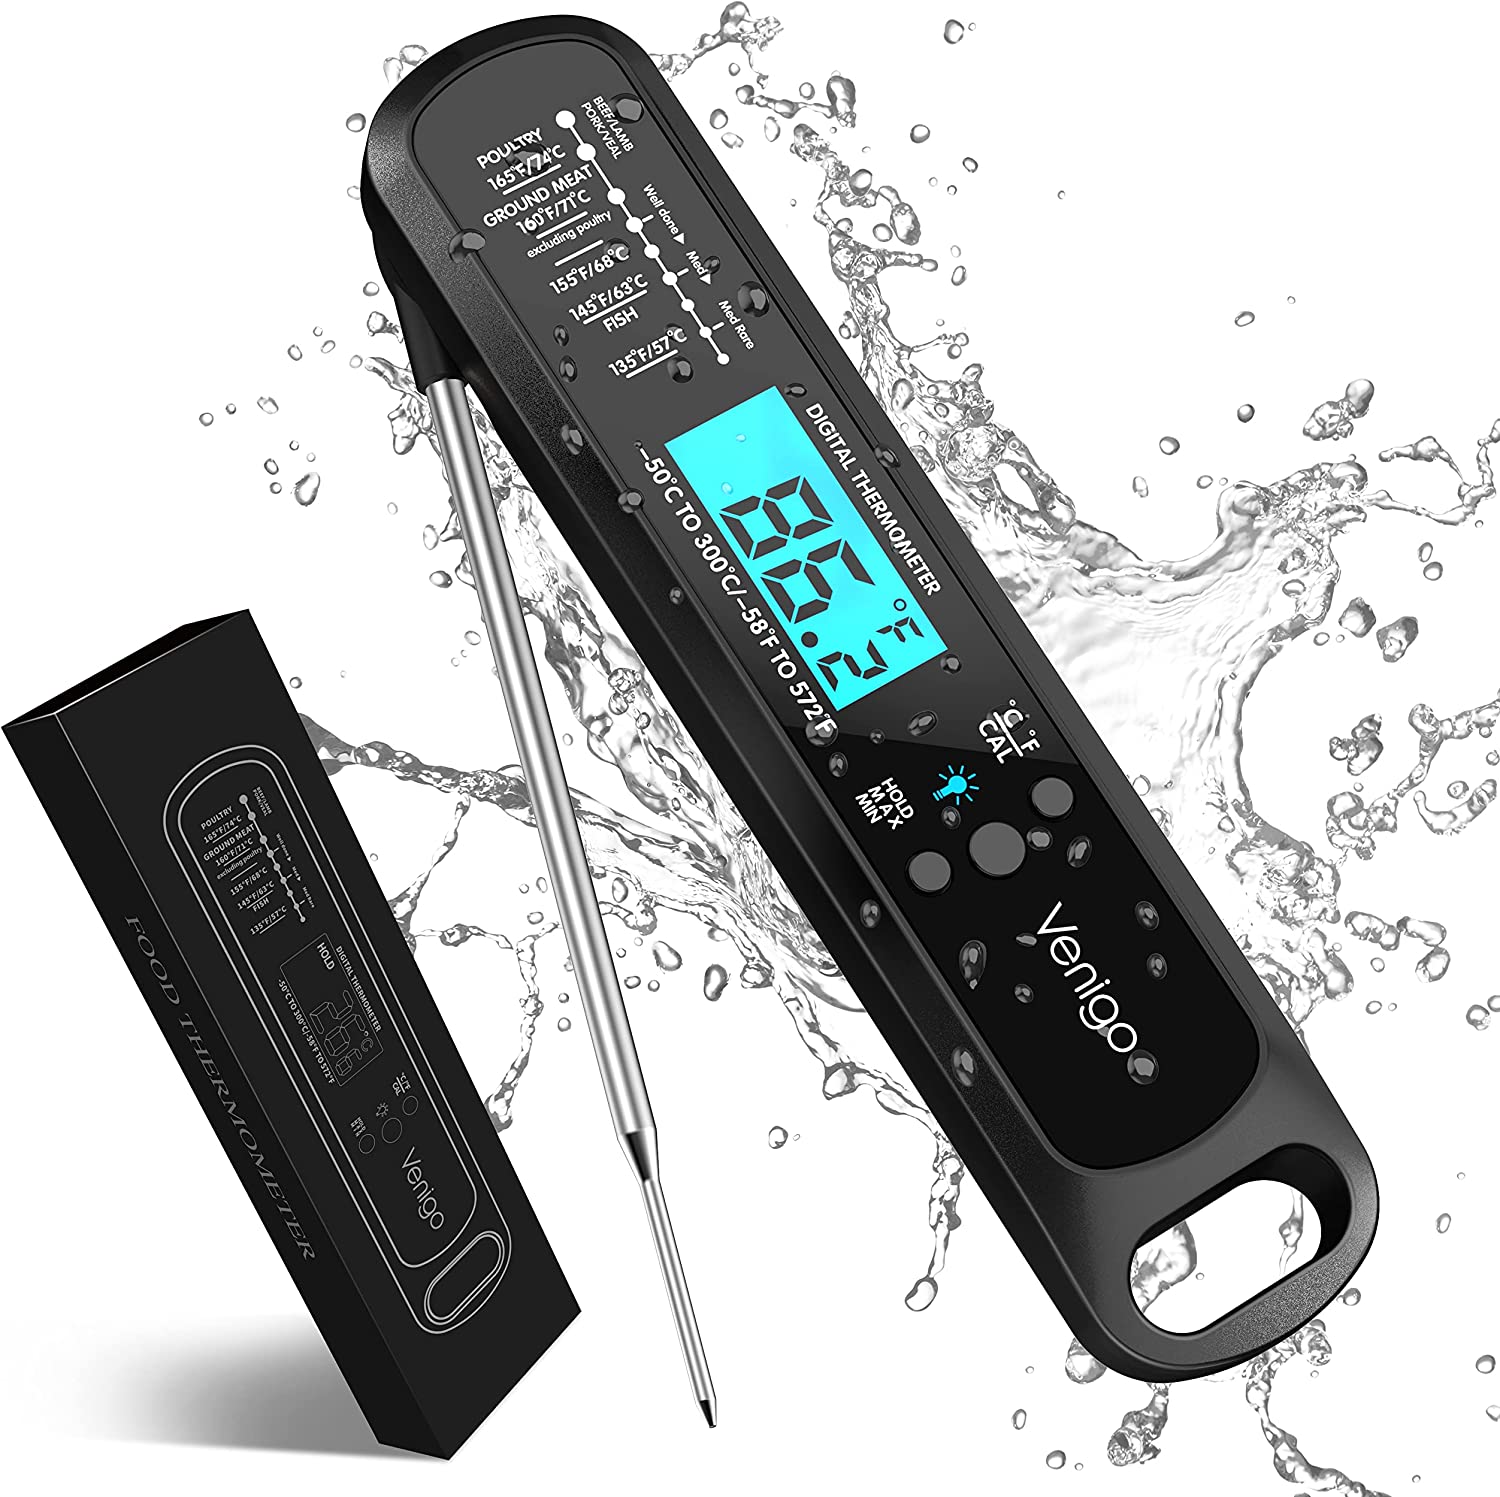 Rubbermaid Commercial Products Dishwasher Safe Analog Probe Meat Thermometer  in the Meat Thermometers department at